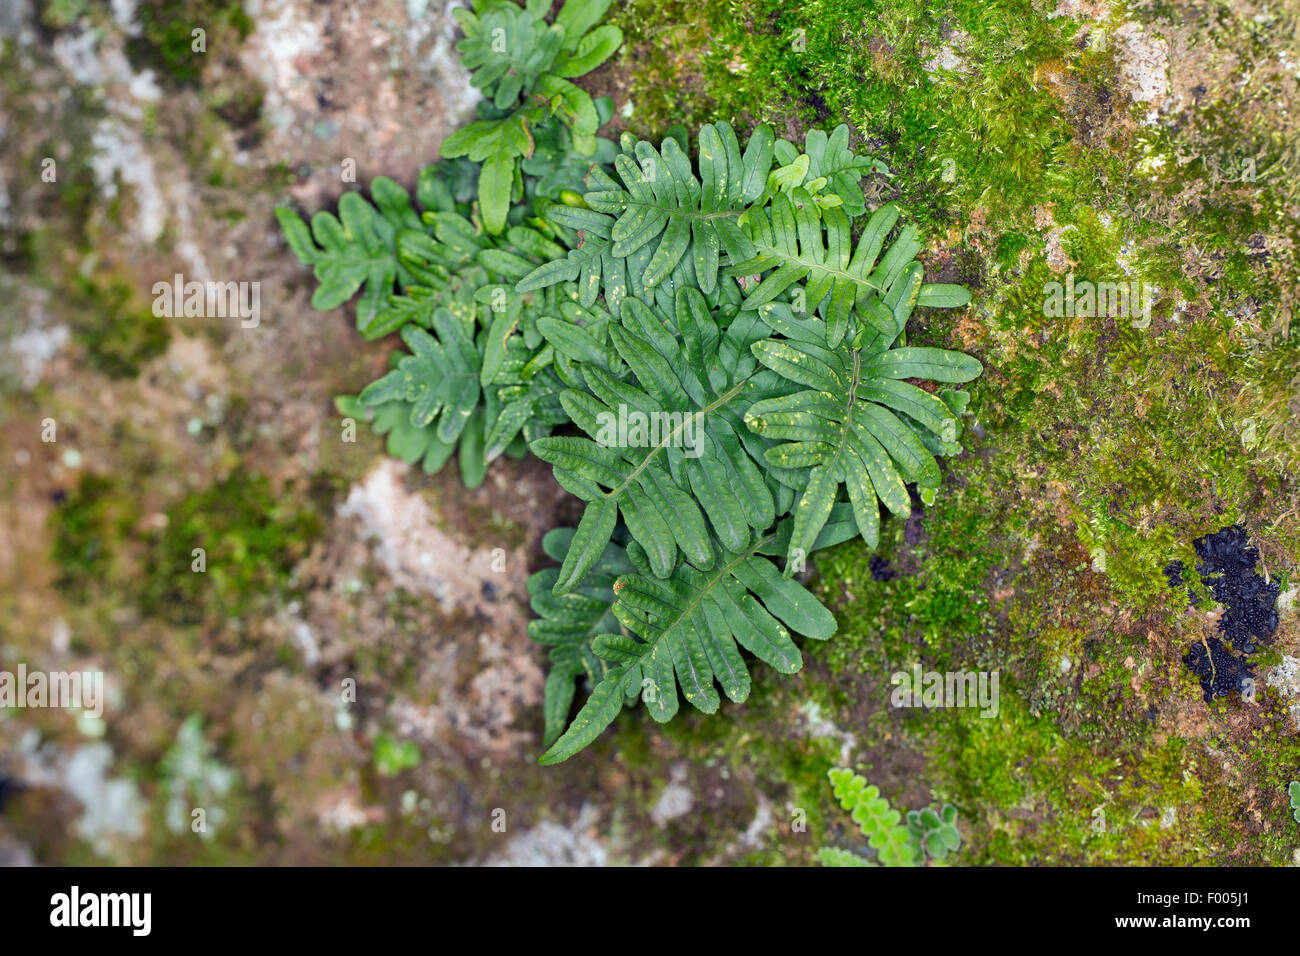 common polypody (Polypodium vulgare), on a rock wall, Germany Stock Photo